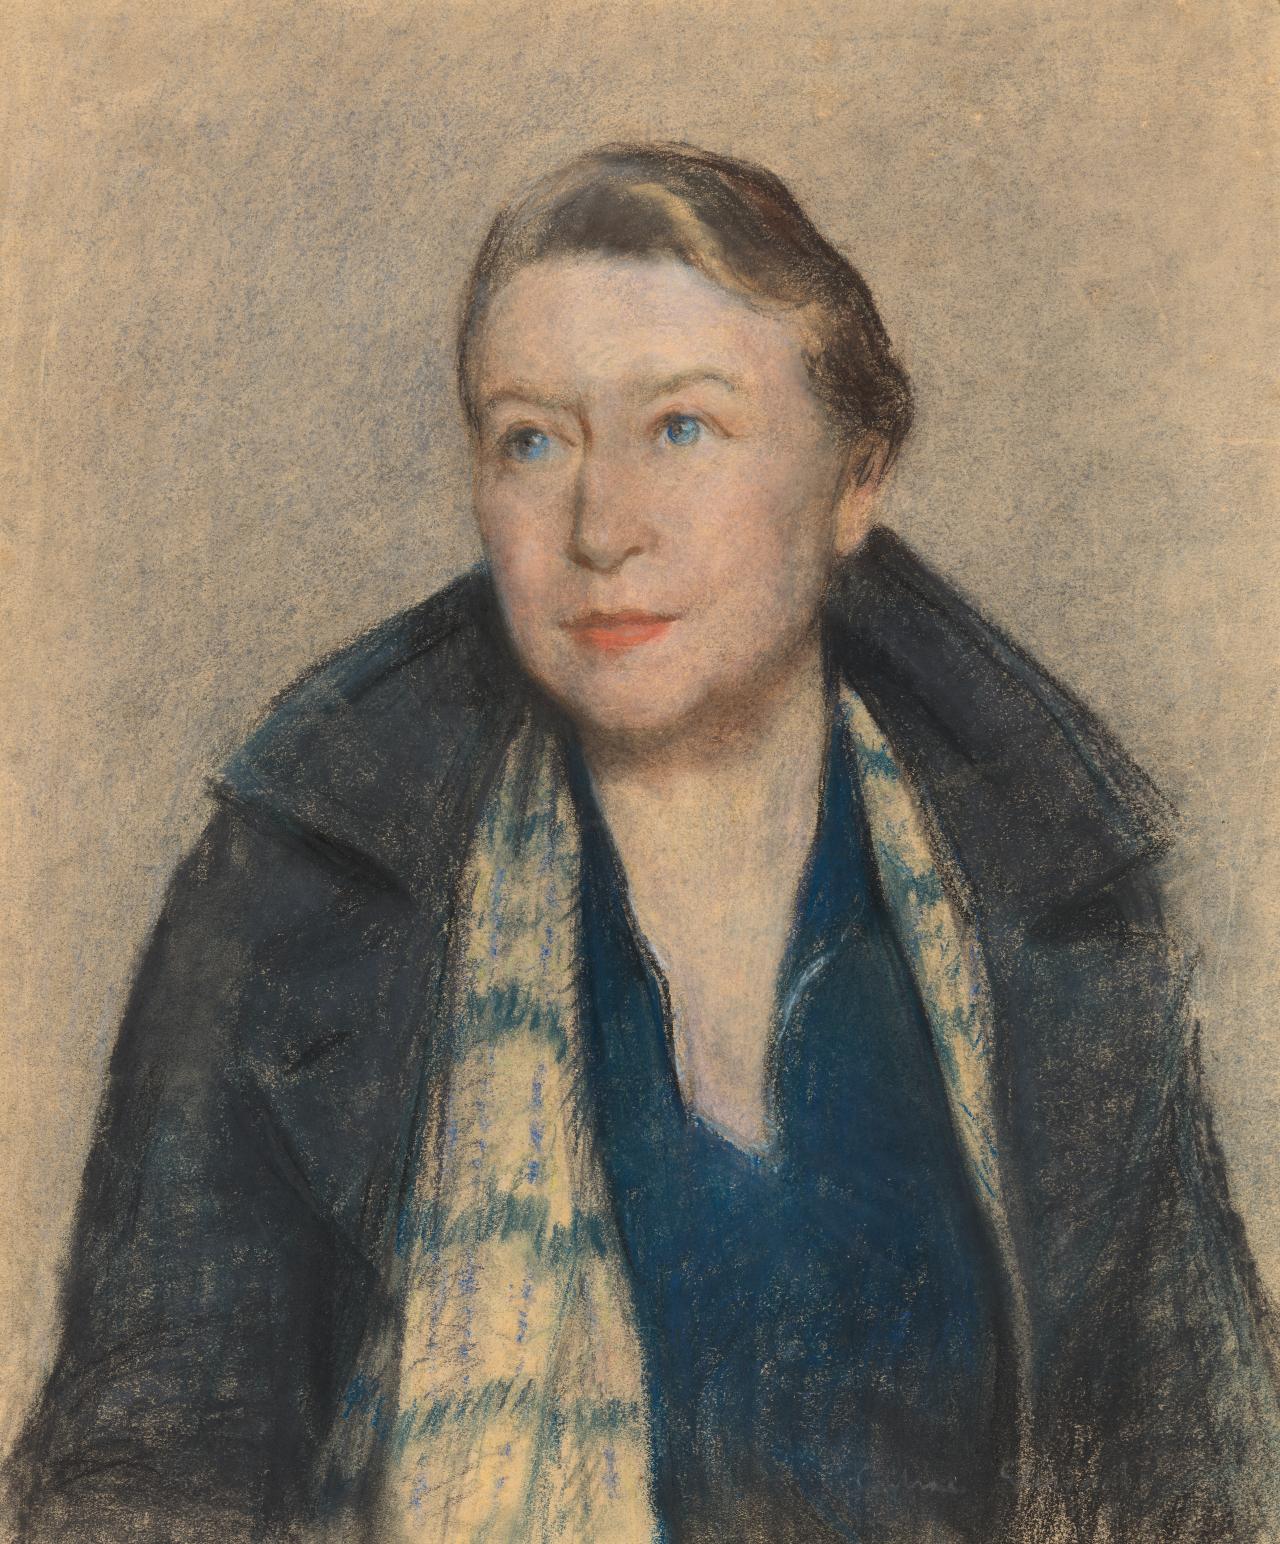 Janet Cumbrae Stewart, <em>Mary Cockburn Mercer</em> (c. 1939), pastel, 55.3 x 46.5 cm, National Gallery of Victoria, Gift of the Mason and Mercer Families 2018